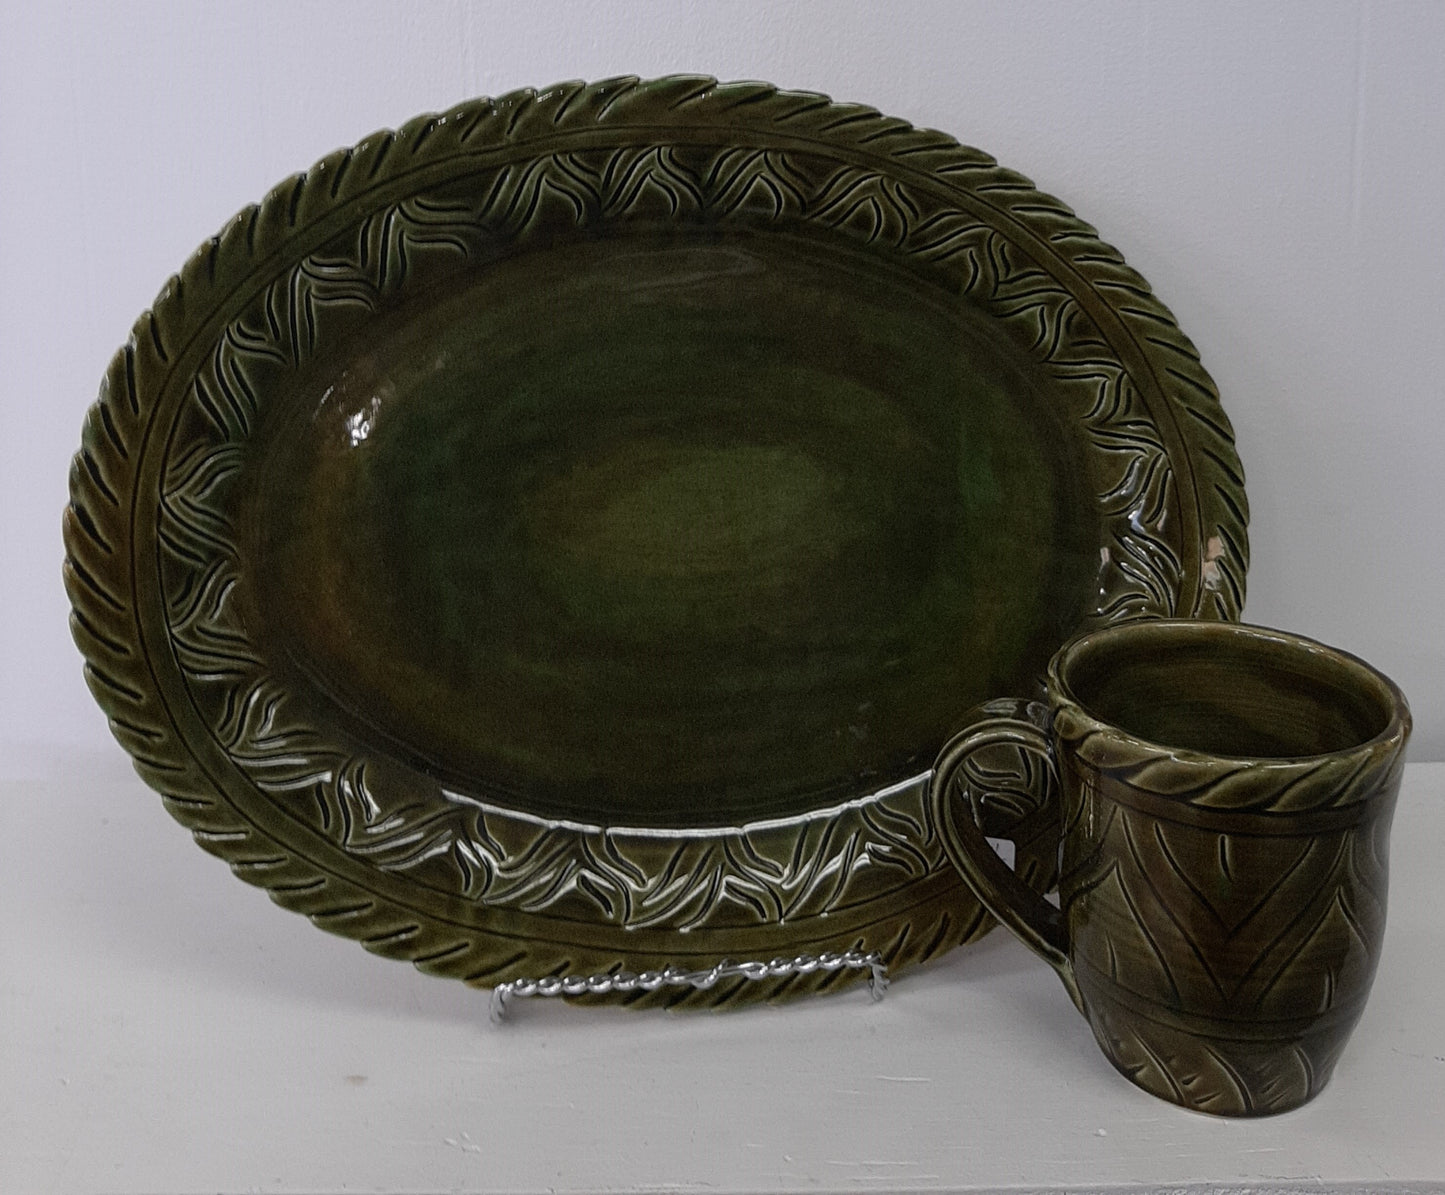 Serving Tray and Cups